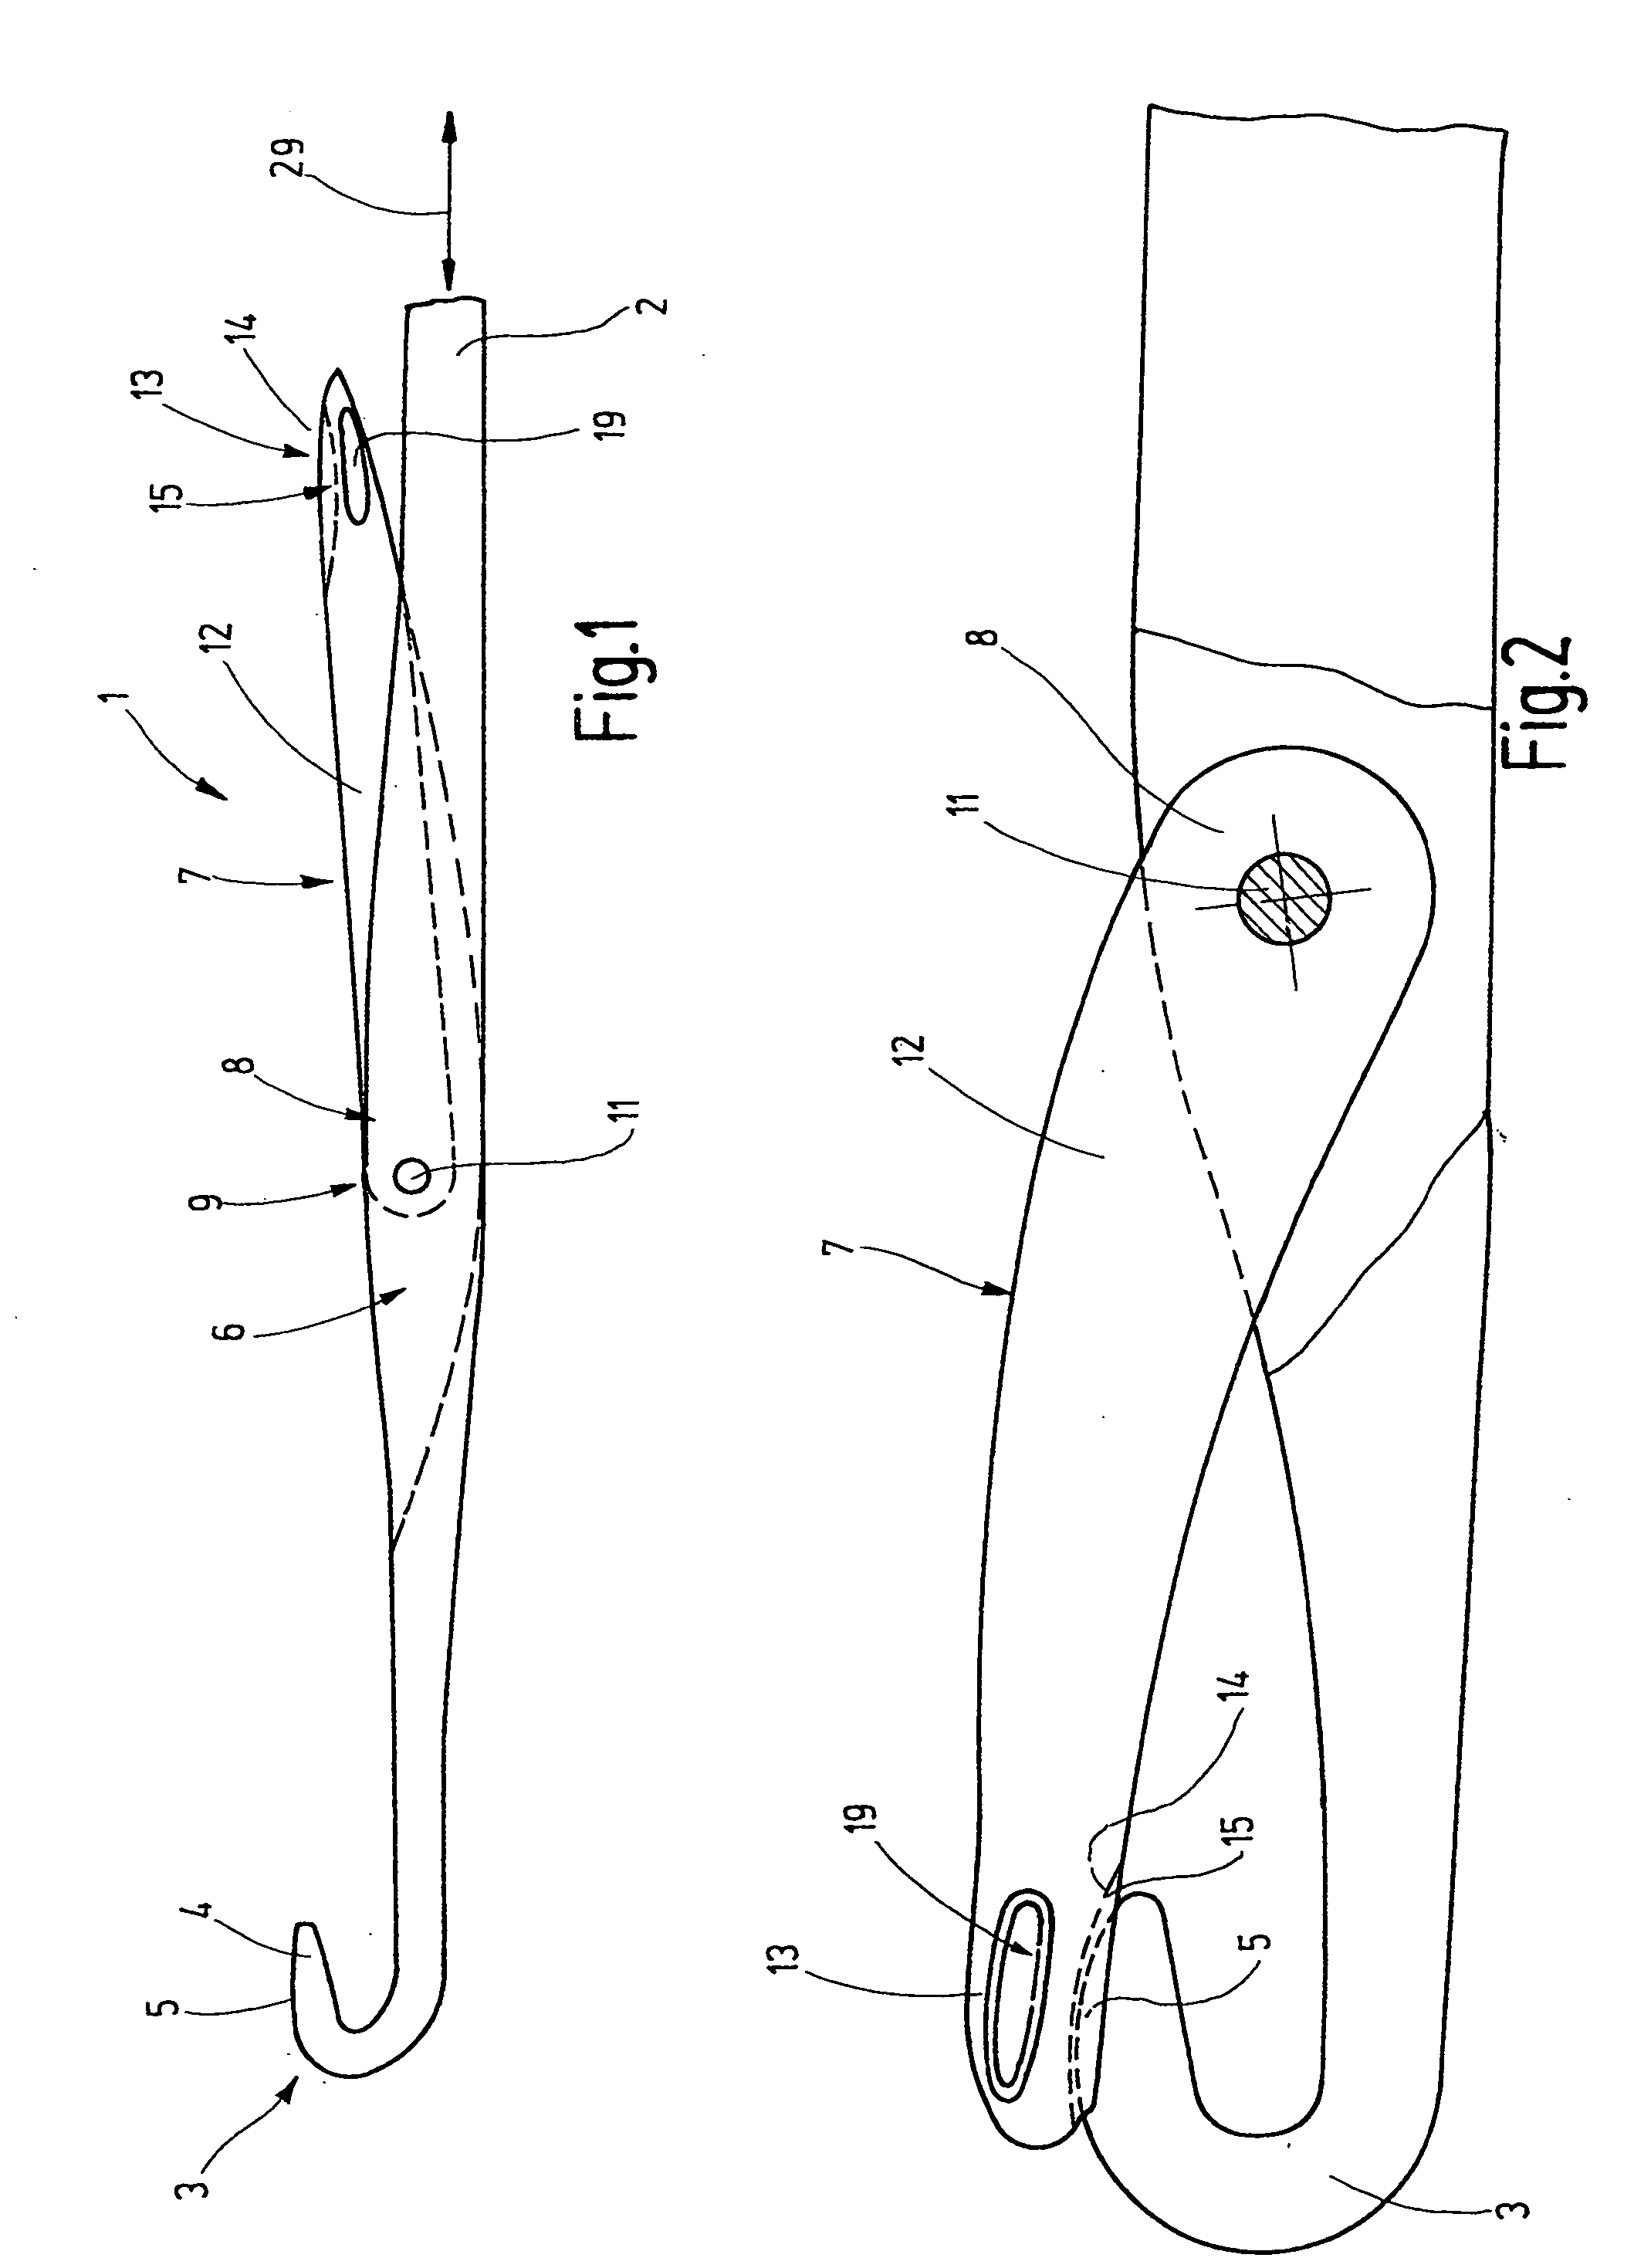 Latch needle for a loop-forming textile machine